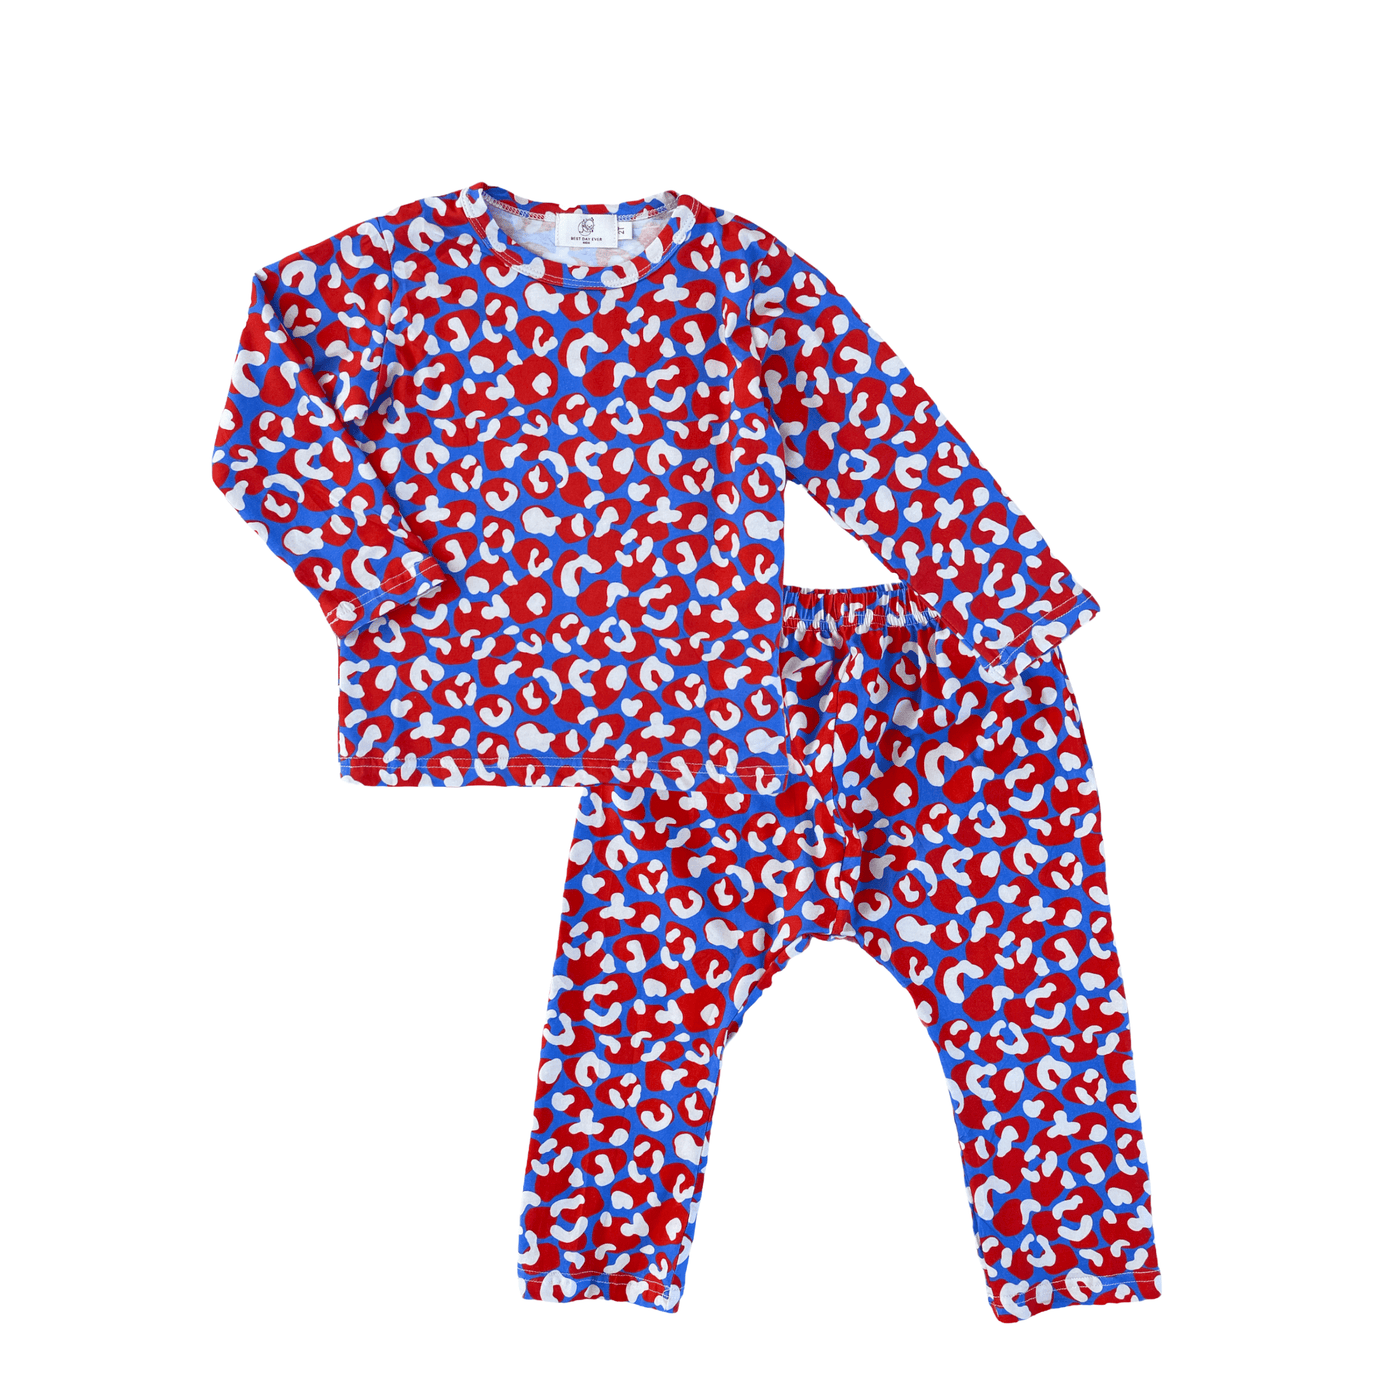 Best Day Ever Kids Baby & Toddler Bottoms Loopy Leopard Harem Pant buy online boutique kids clothing